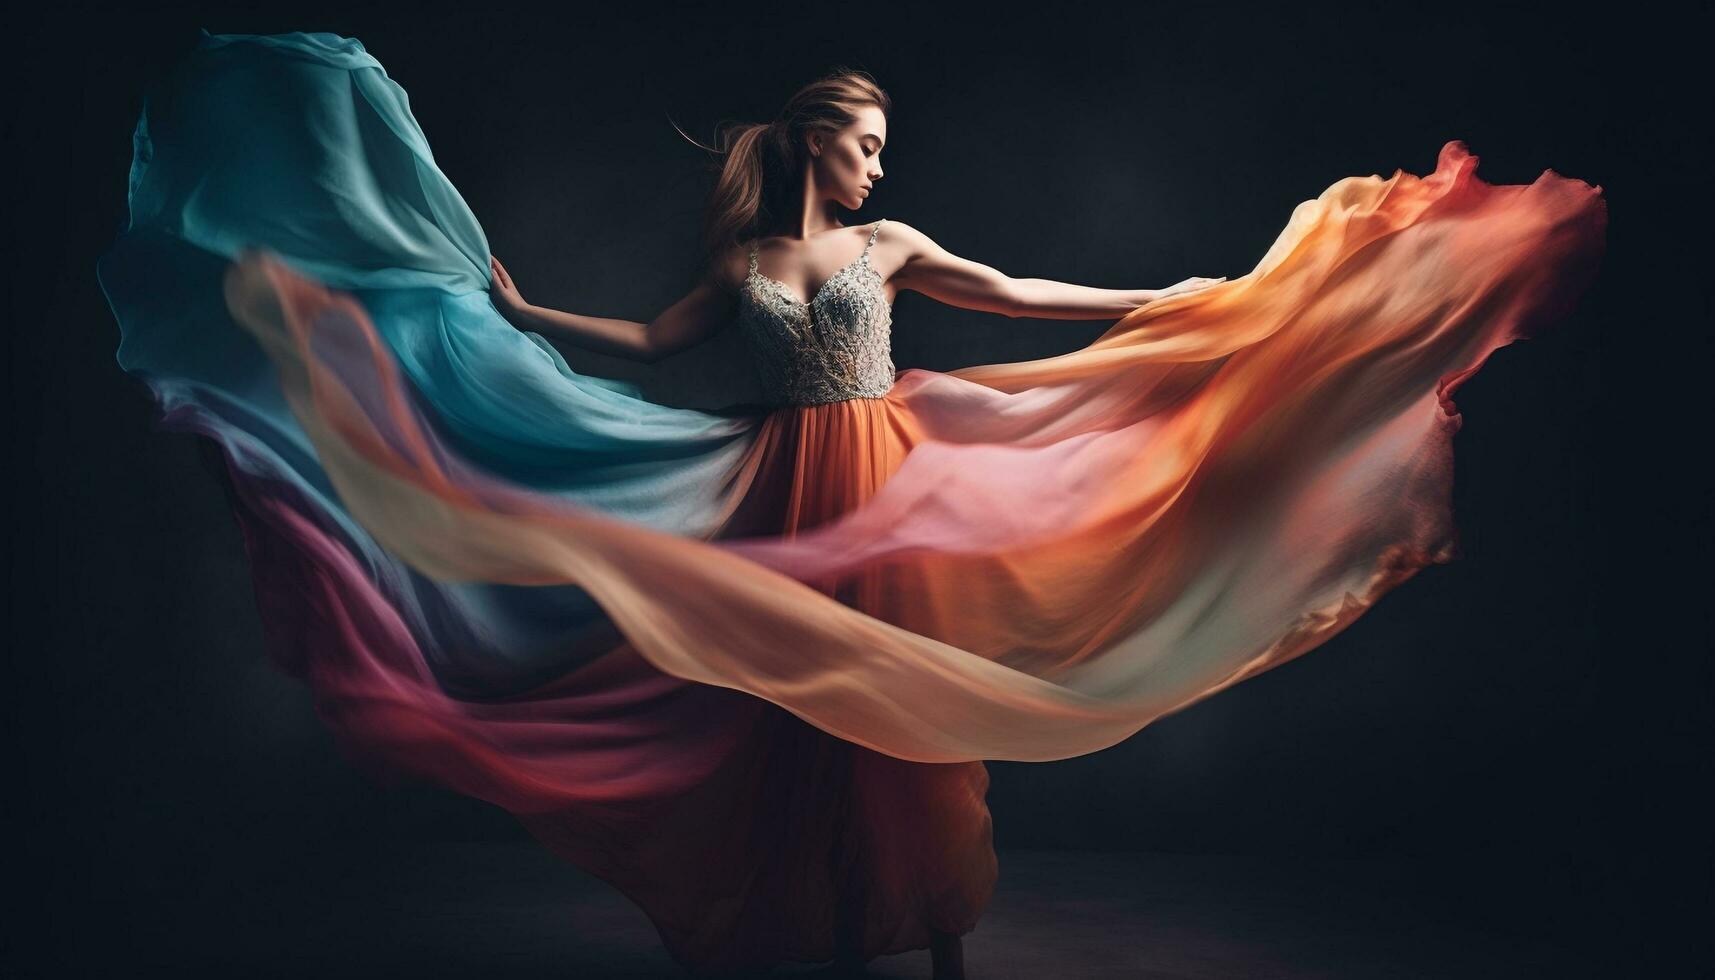 Elegant ballet dancer in silk dress performing gracefully generated by AI photo